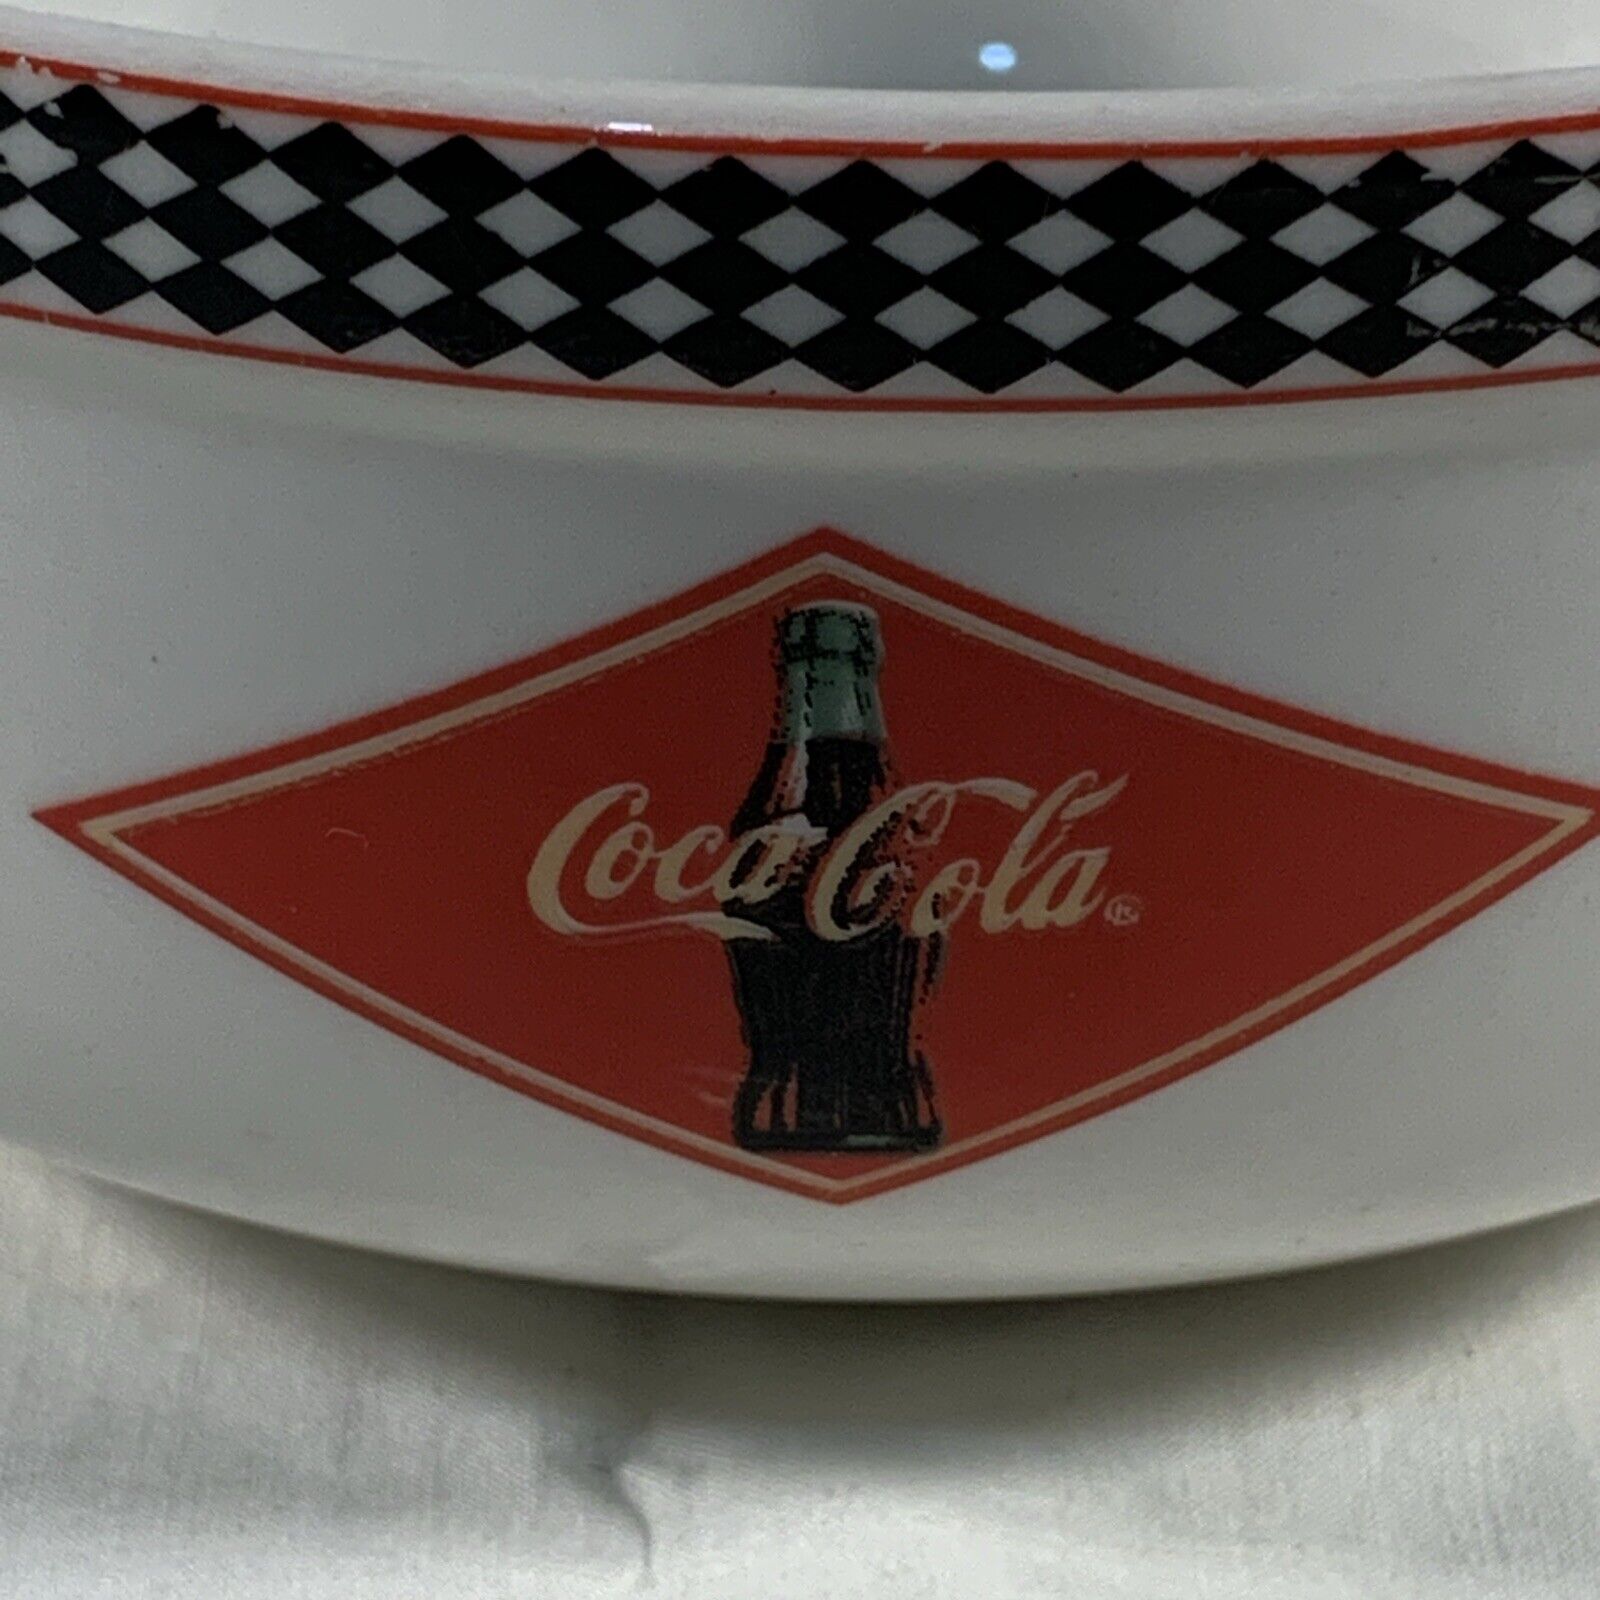 Vintage Coca Cola Soup Bowl By Gibson - Mint Condition